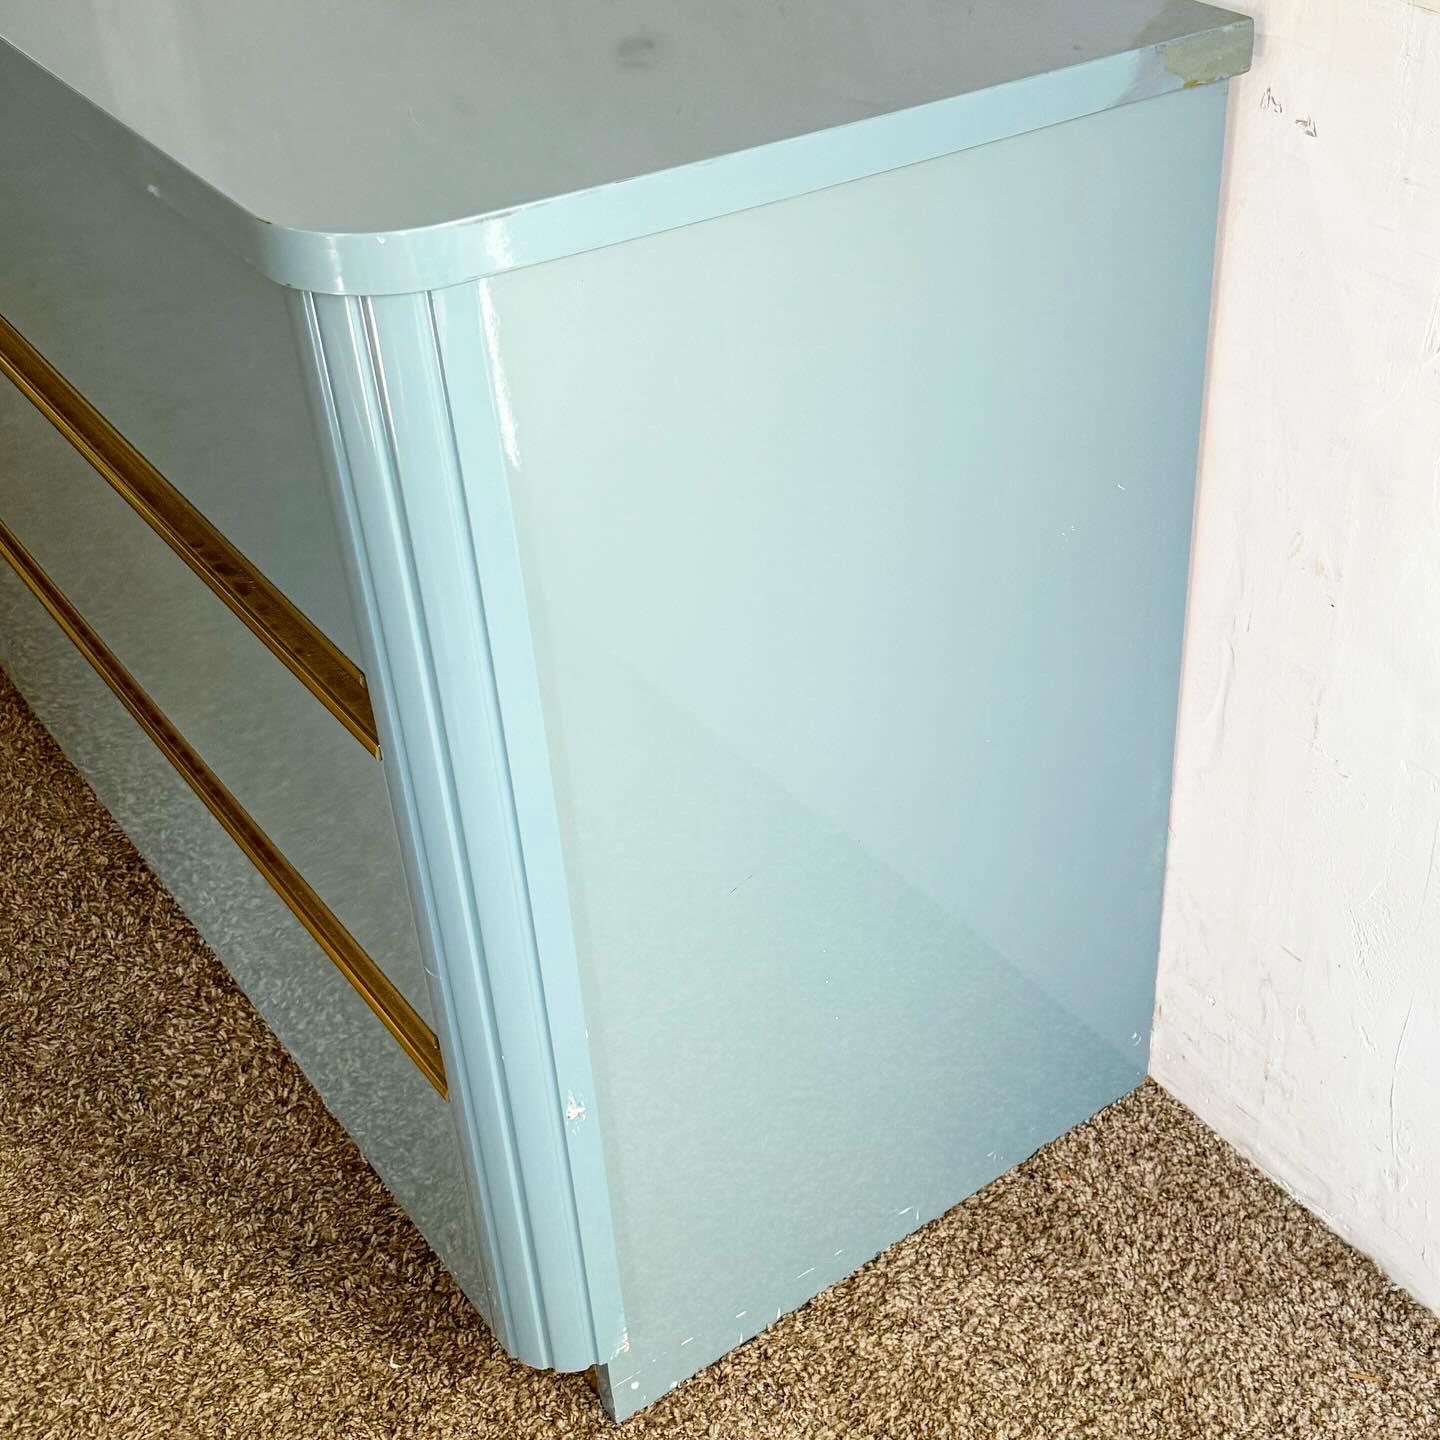 Experience modern elegance with the Post-Modern Postmodern Baby Blue Lacquered Dresser with Gold Accents. This dresser showcases a vibrant baby blue lacquered finish, enhanced by luxurious gold accents. Its sleek lines and minimalist form reflect